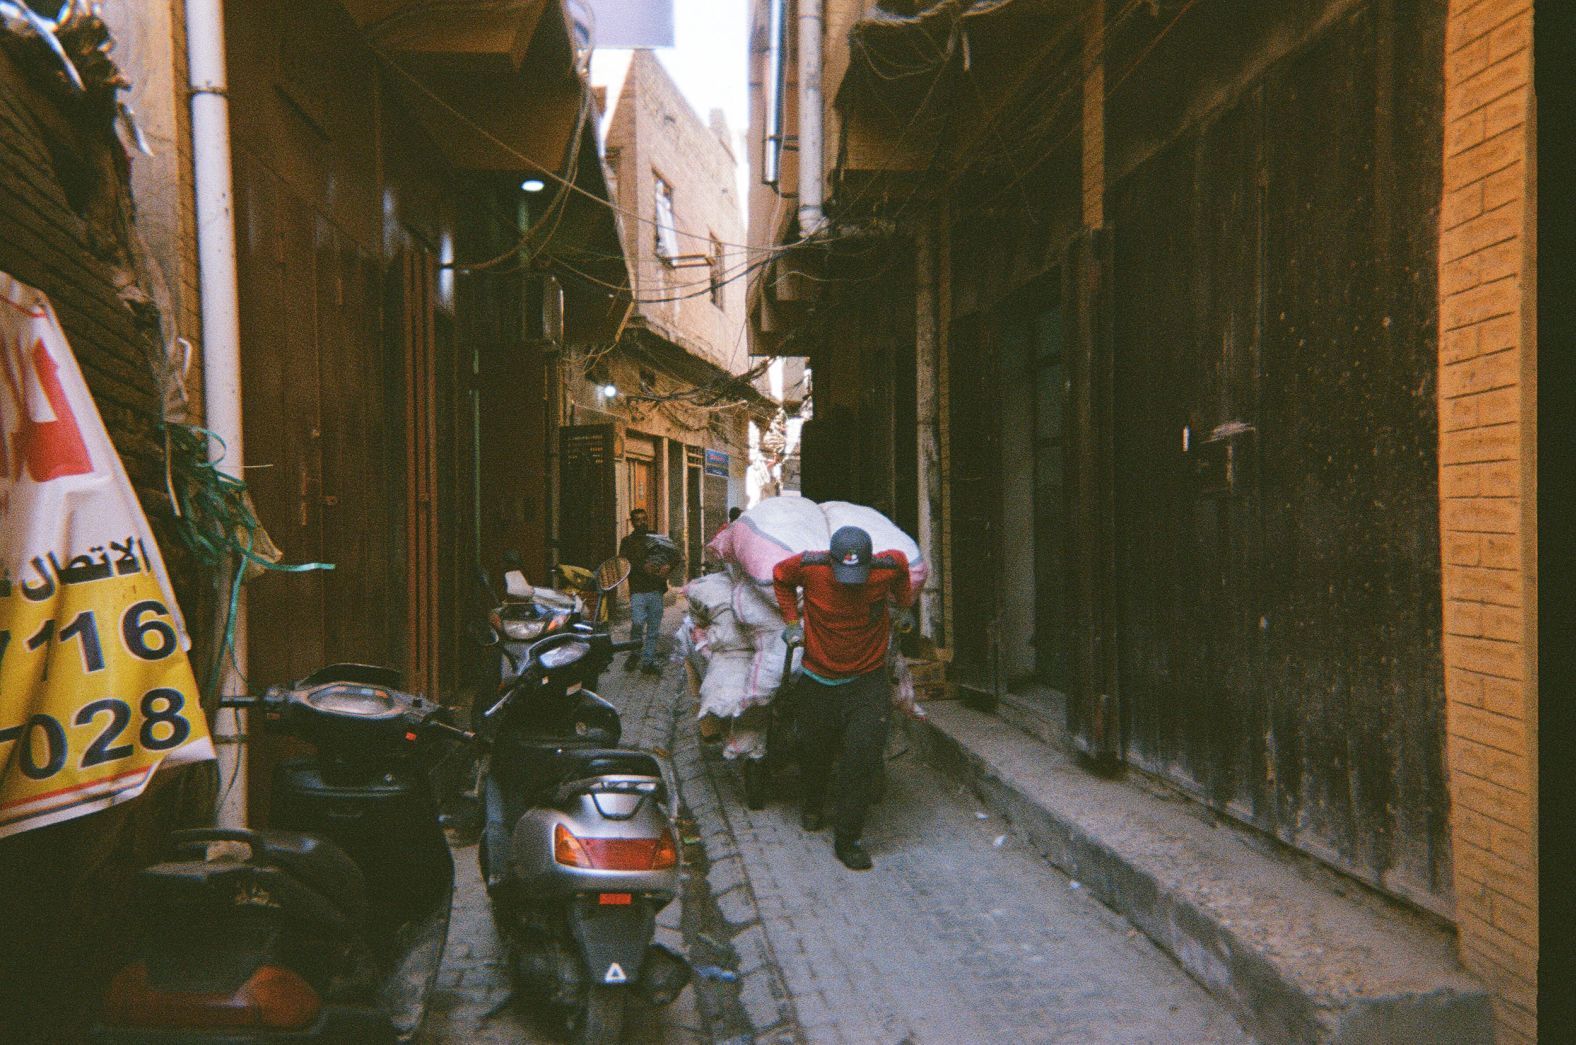 A man transports goods to a commercial market on a narrow alley in the Haydar Khana area of Baghdad. "It's my father's profession," Karim said. "He told me, 'This guy was just like me, working to carry things from merchants to customers.'"<br /><br />While Karim says he was fortunate because he comes from a well-to-do family, that doesn't mean is childhood in Iraq was rosy. He was 10 years old at the start of the US occupation, which went into his teen years.<br /><br />"Imagine that you are in the height of your adolescence, afraid to go out to live your life as a young teenager, and you are shocked that someone is trying to kill you [based] on your identity without knowing who you are," he said.